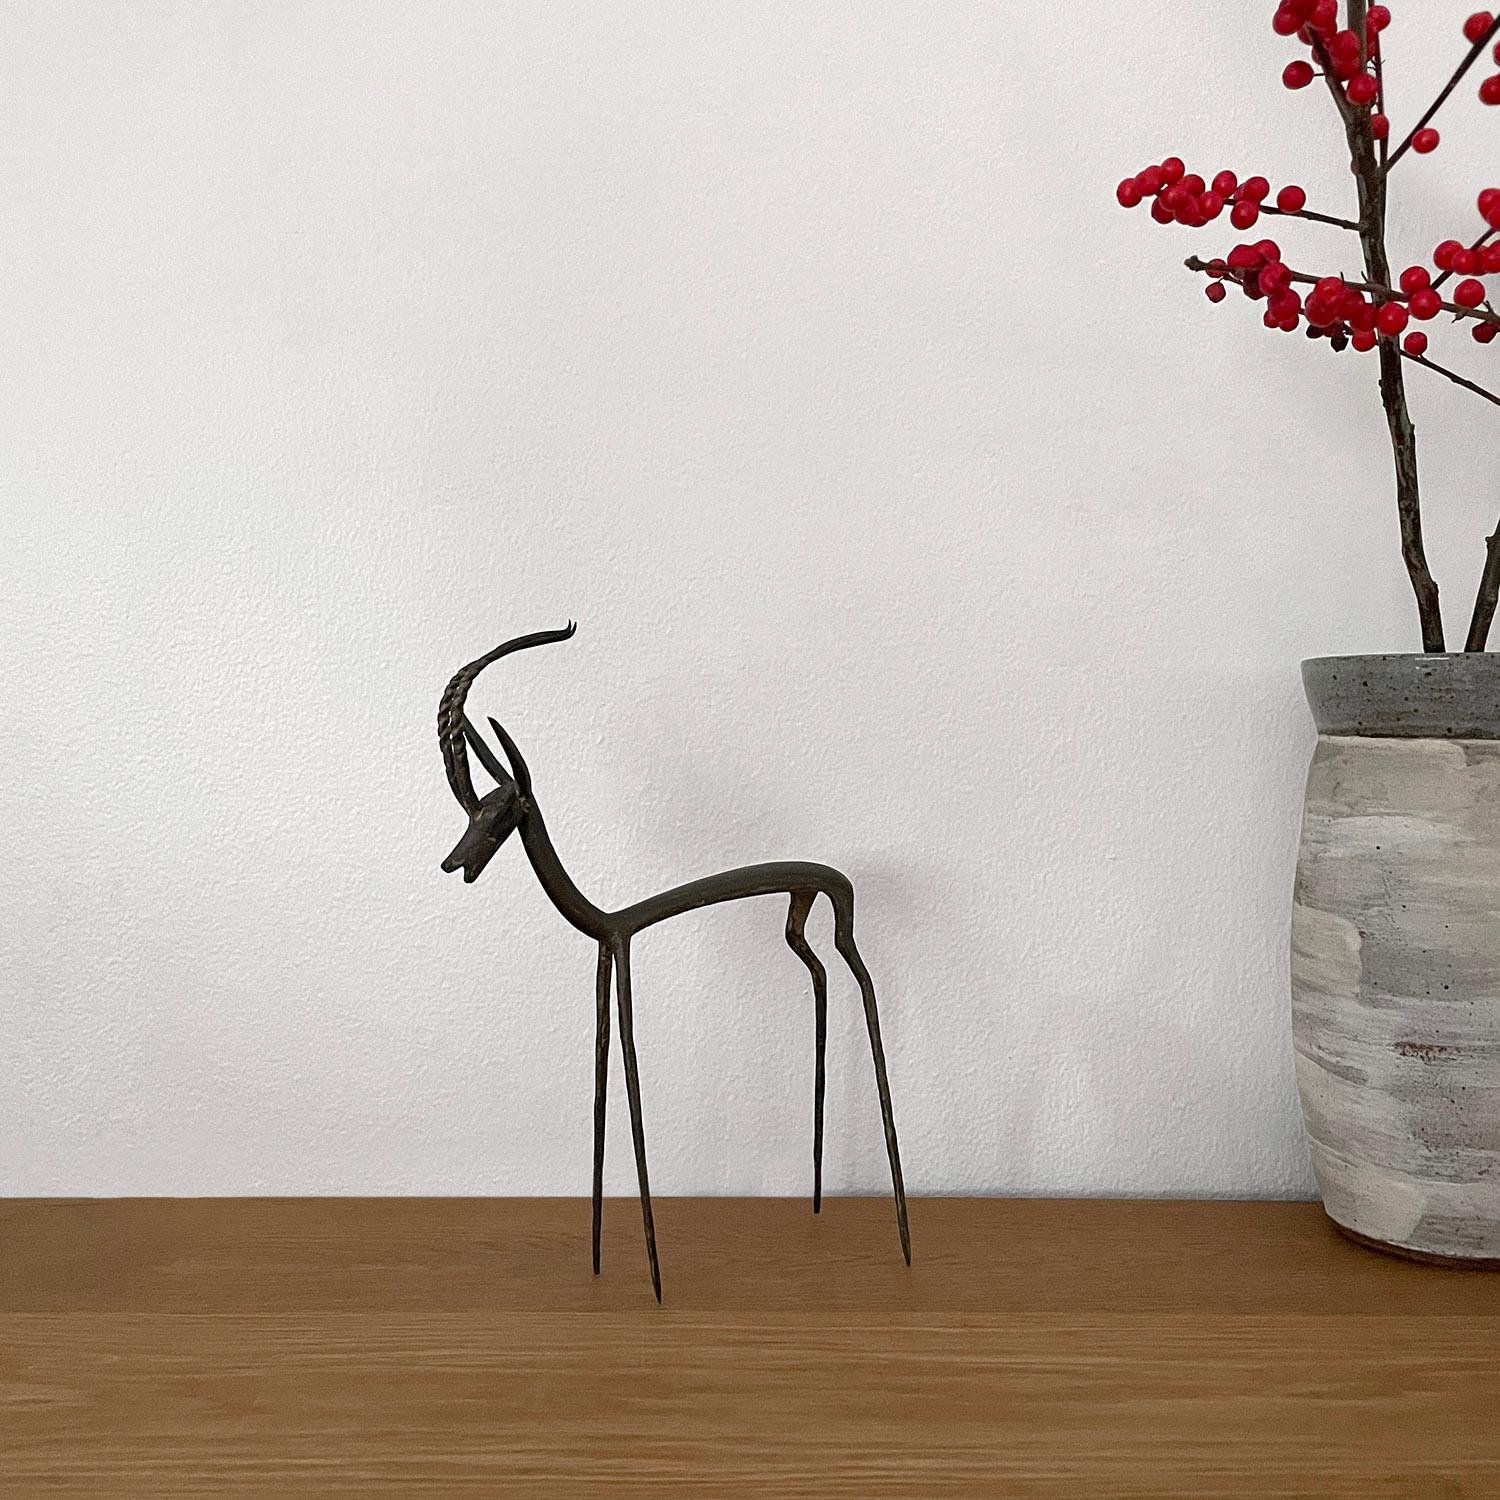 Italian brutalist iron antelope sculpture 
Italy, circa 1950s 
Beautiful sculpted handcrafted artisanal piece
Antelopes are said to be symbols of spirituality and freedom 
Patina from age and use 
Last photo is for reference only
Please see other